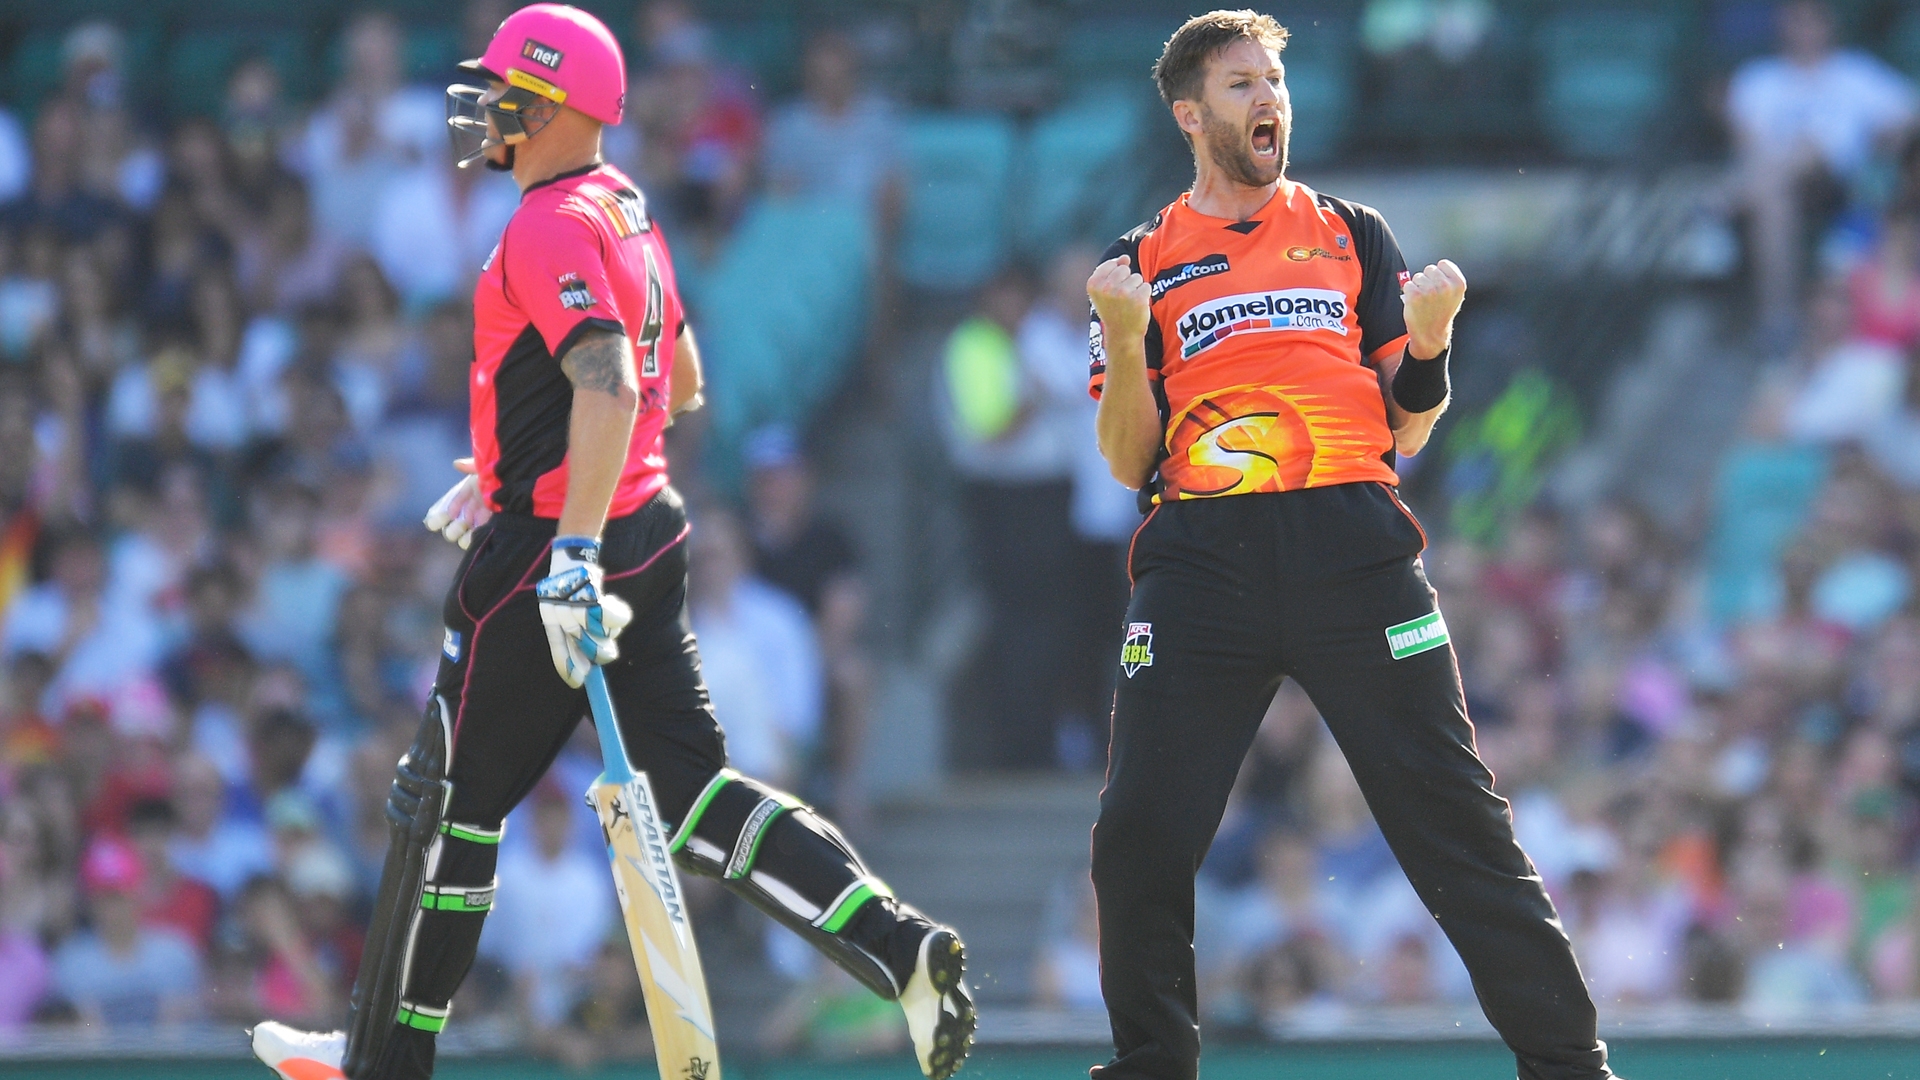 Article image for Tye hat-trick helps Scorchers past Sixers